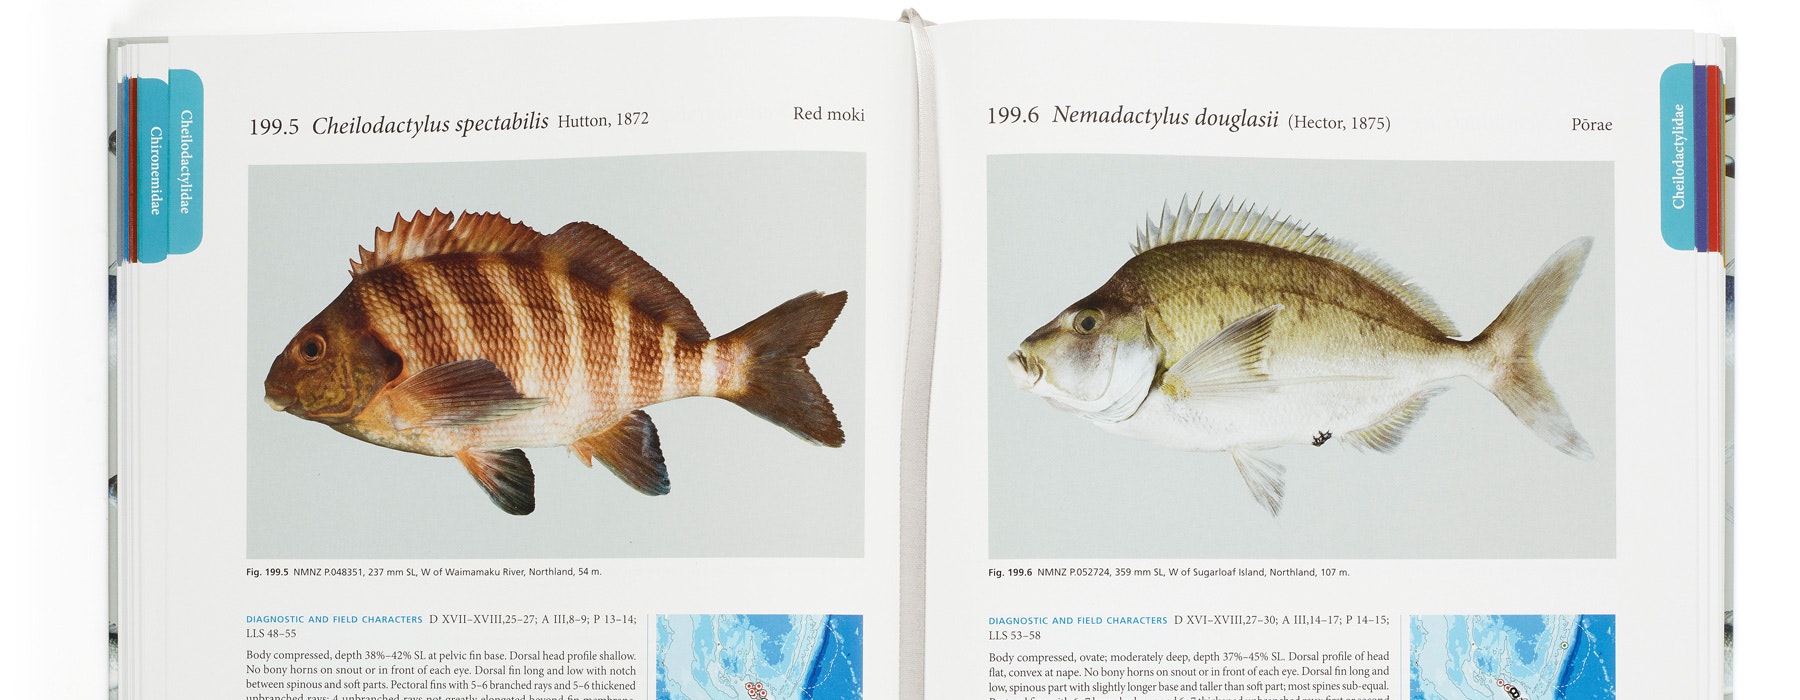 Internal pages, photograph by Michael Hall. From The Fishes of New Zealand, edited by Clive Roberts, Andrew Stewart, and Carl Struthers, 2015